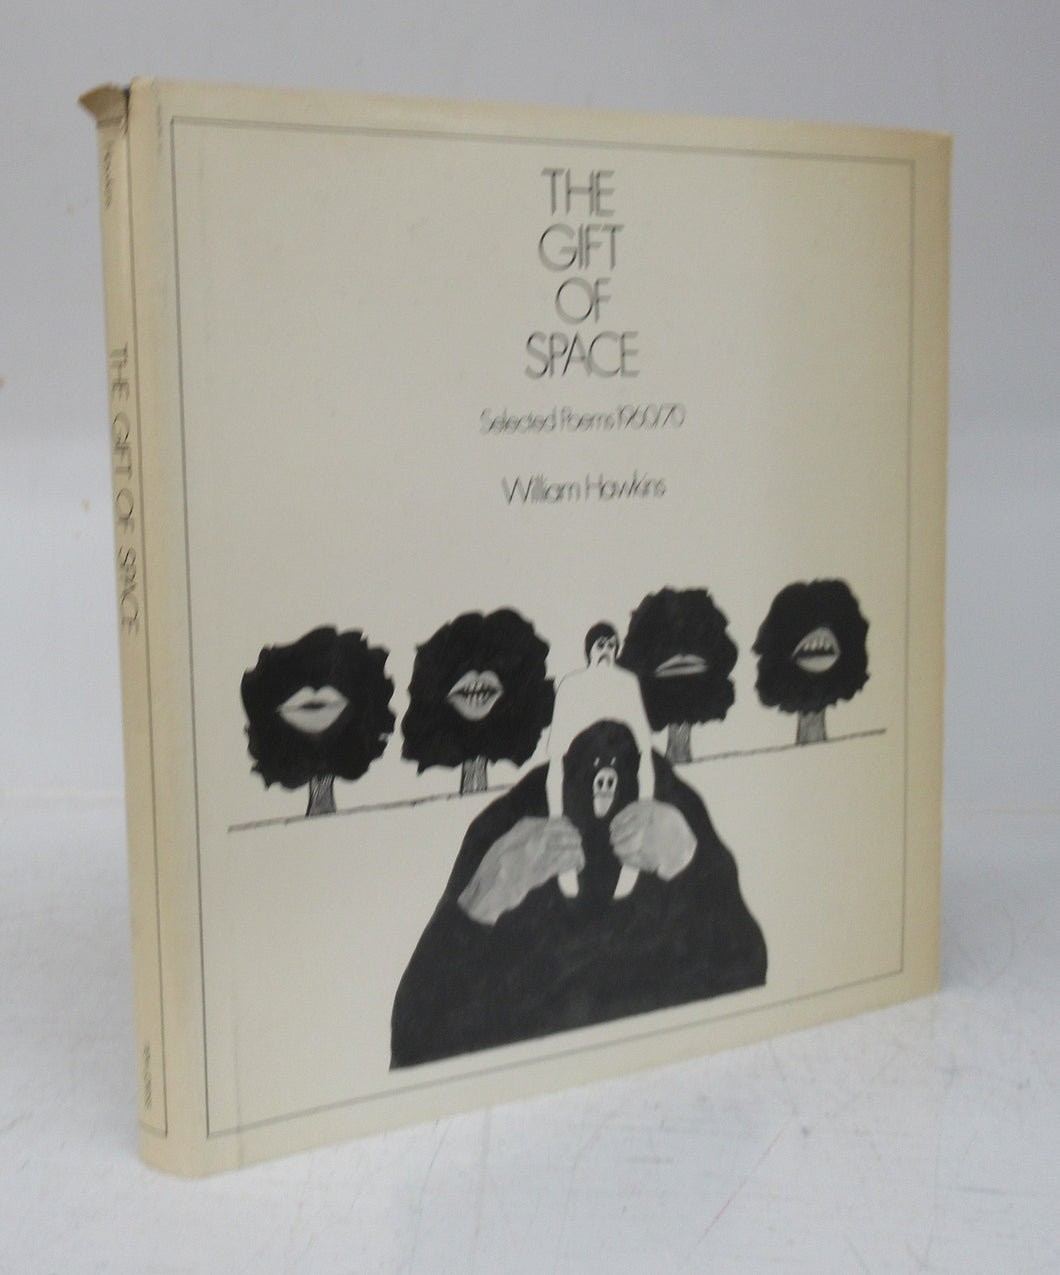 The Gift of Space: Selected Poems 1960/70